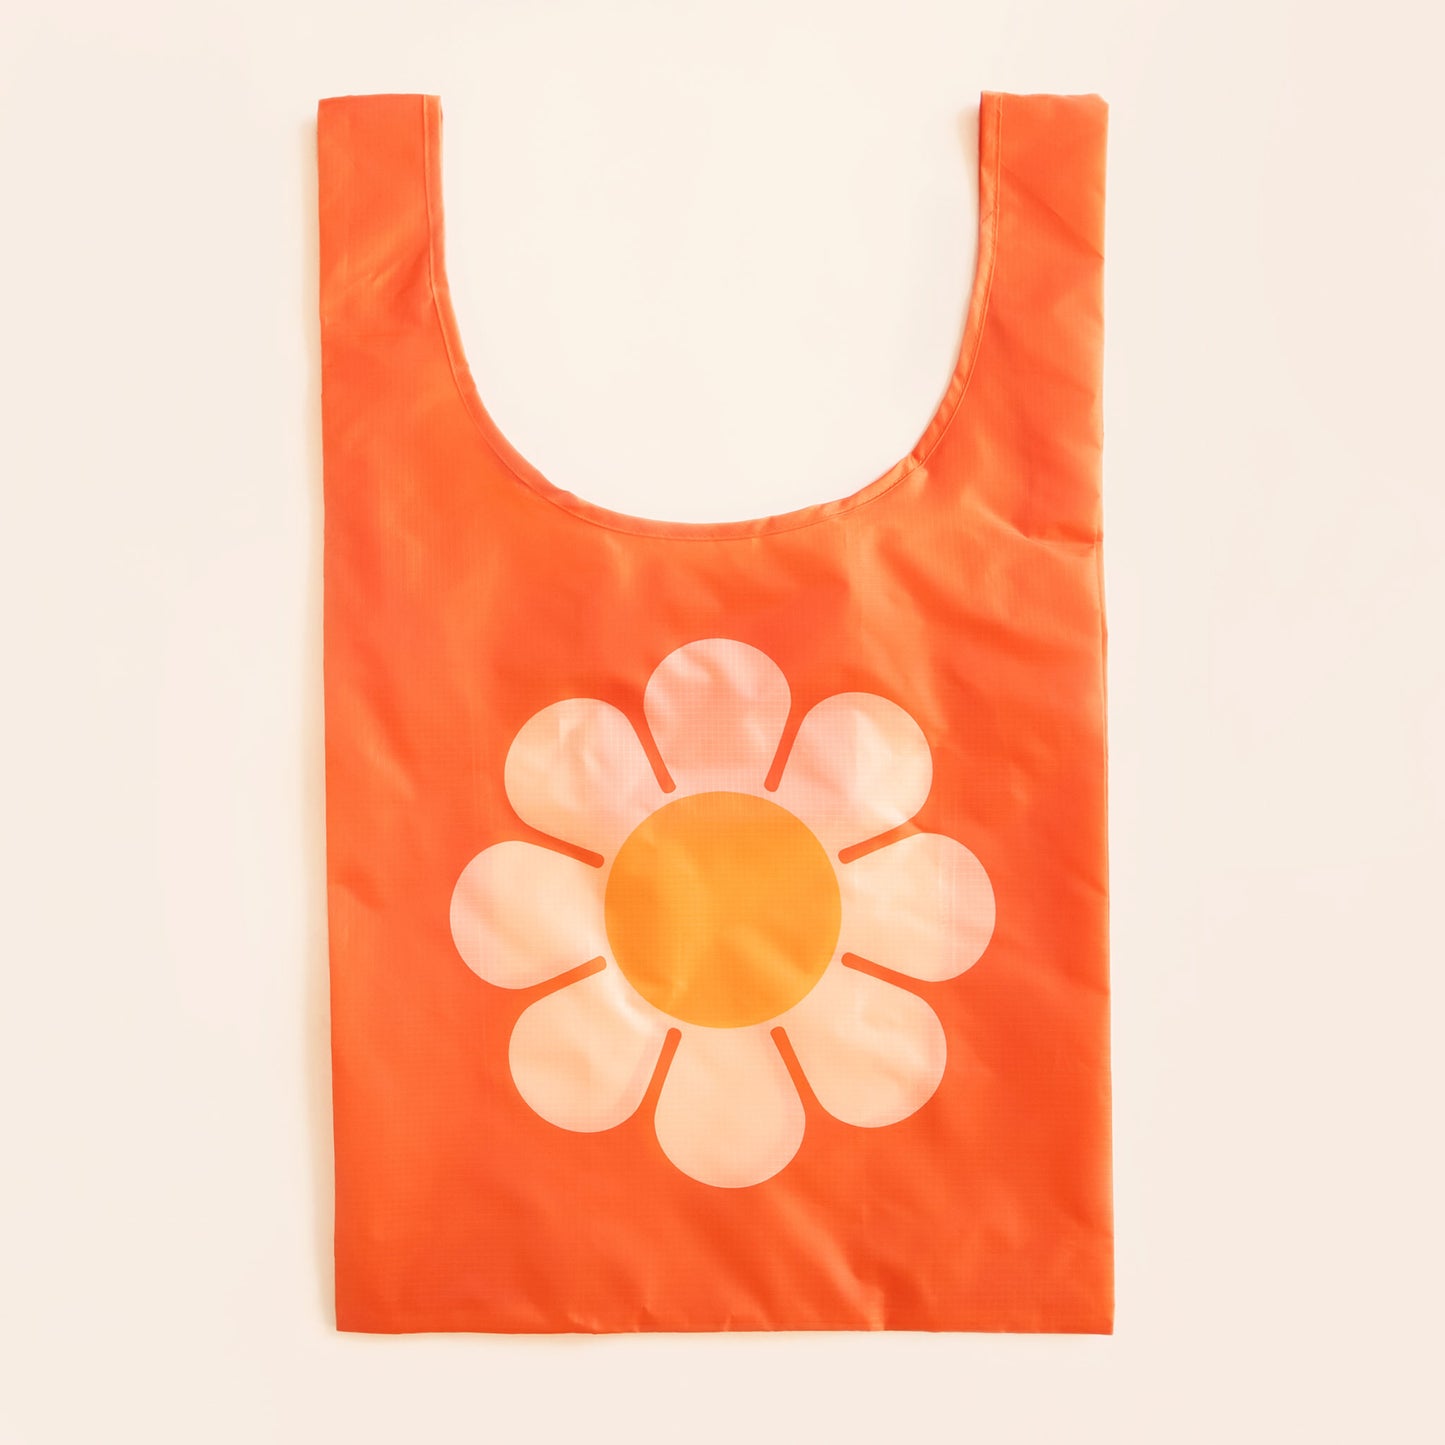 Orange reusable bag featuring a large bus flower with peach petals and tangerine center. The flower is positioned in the center of the bag. The bag is positioned flat on a table and has a 'U' shape between two handles.